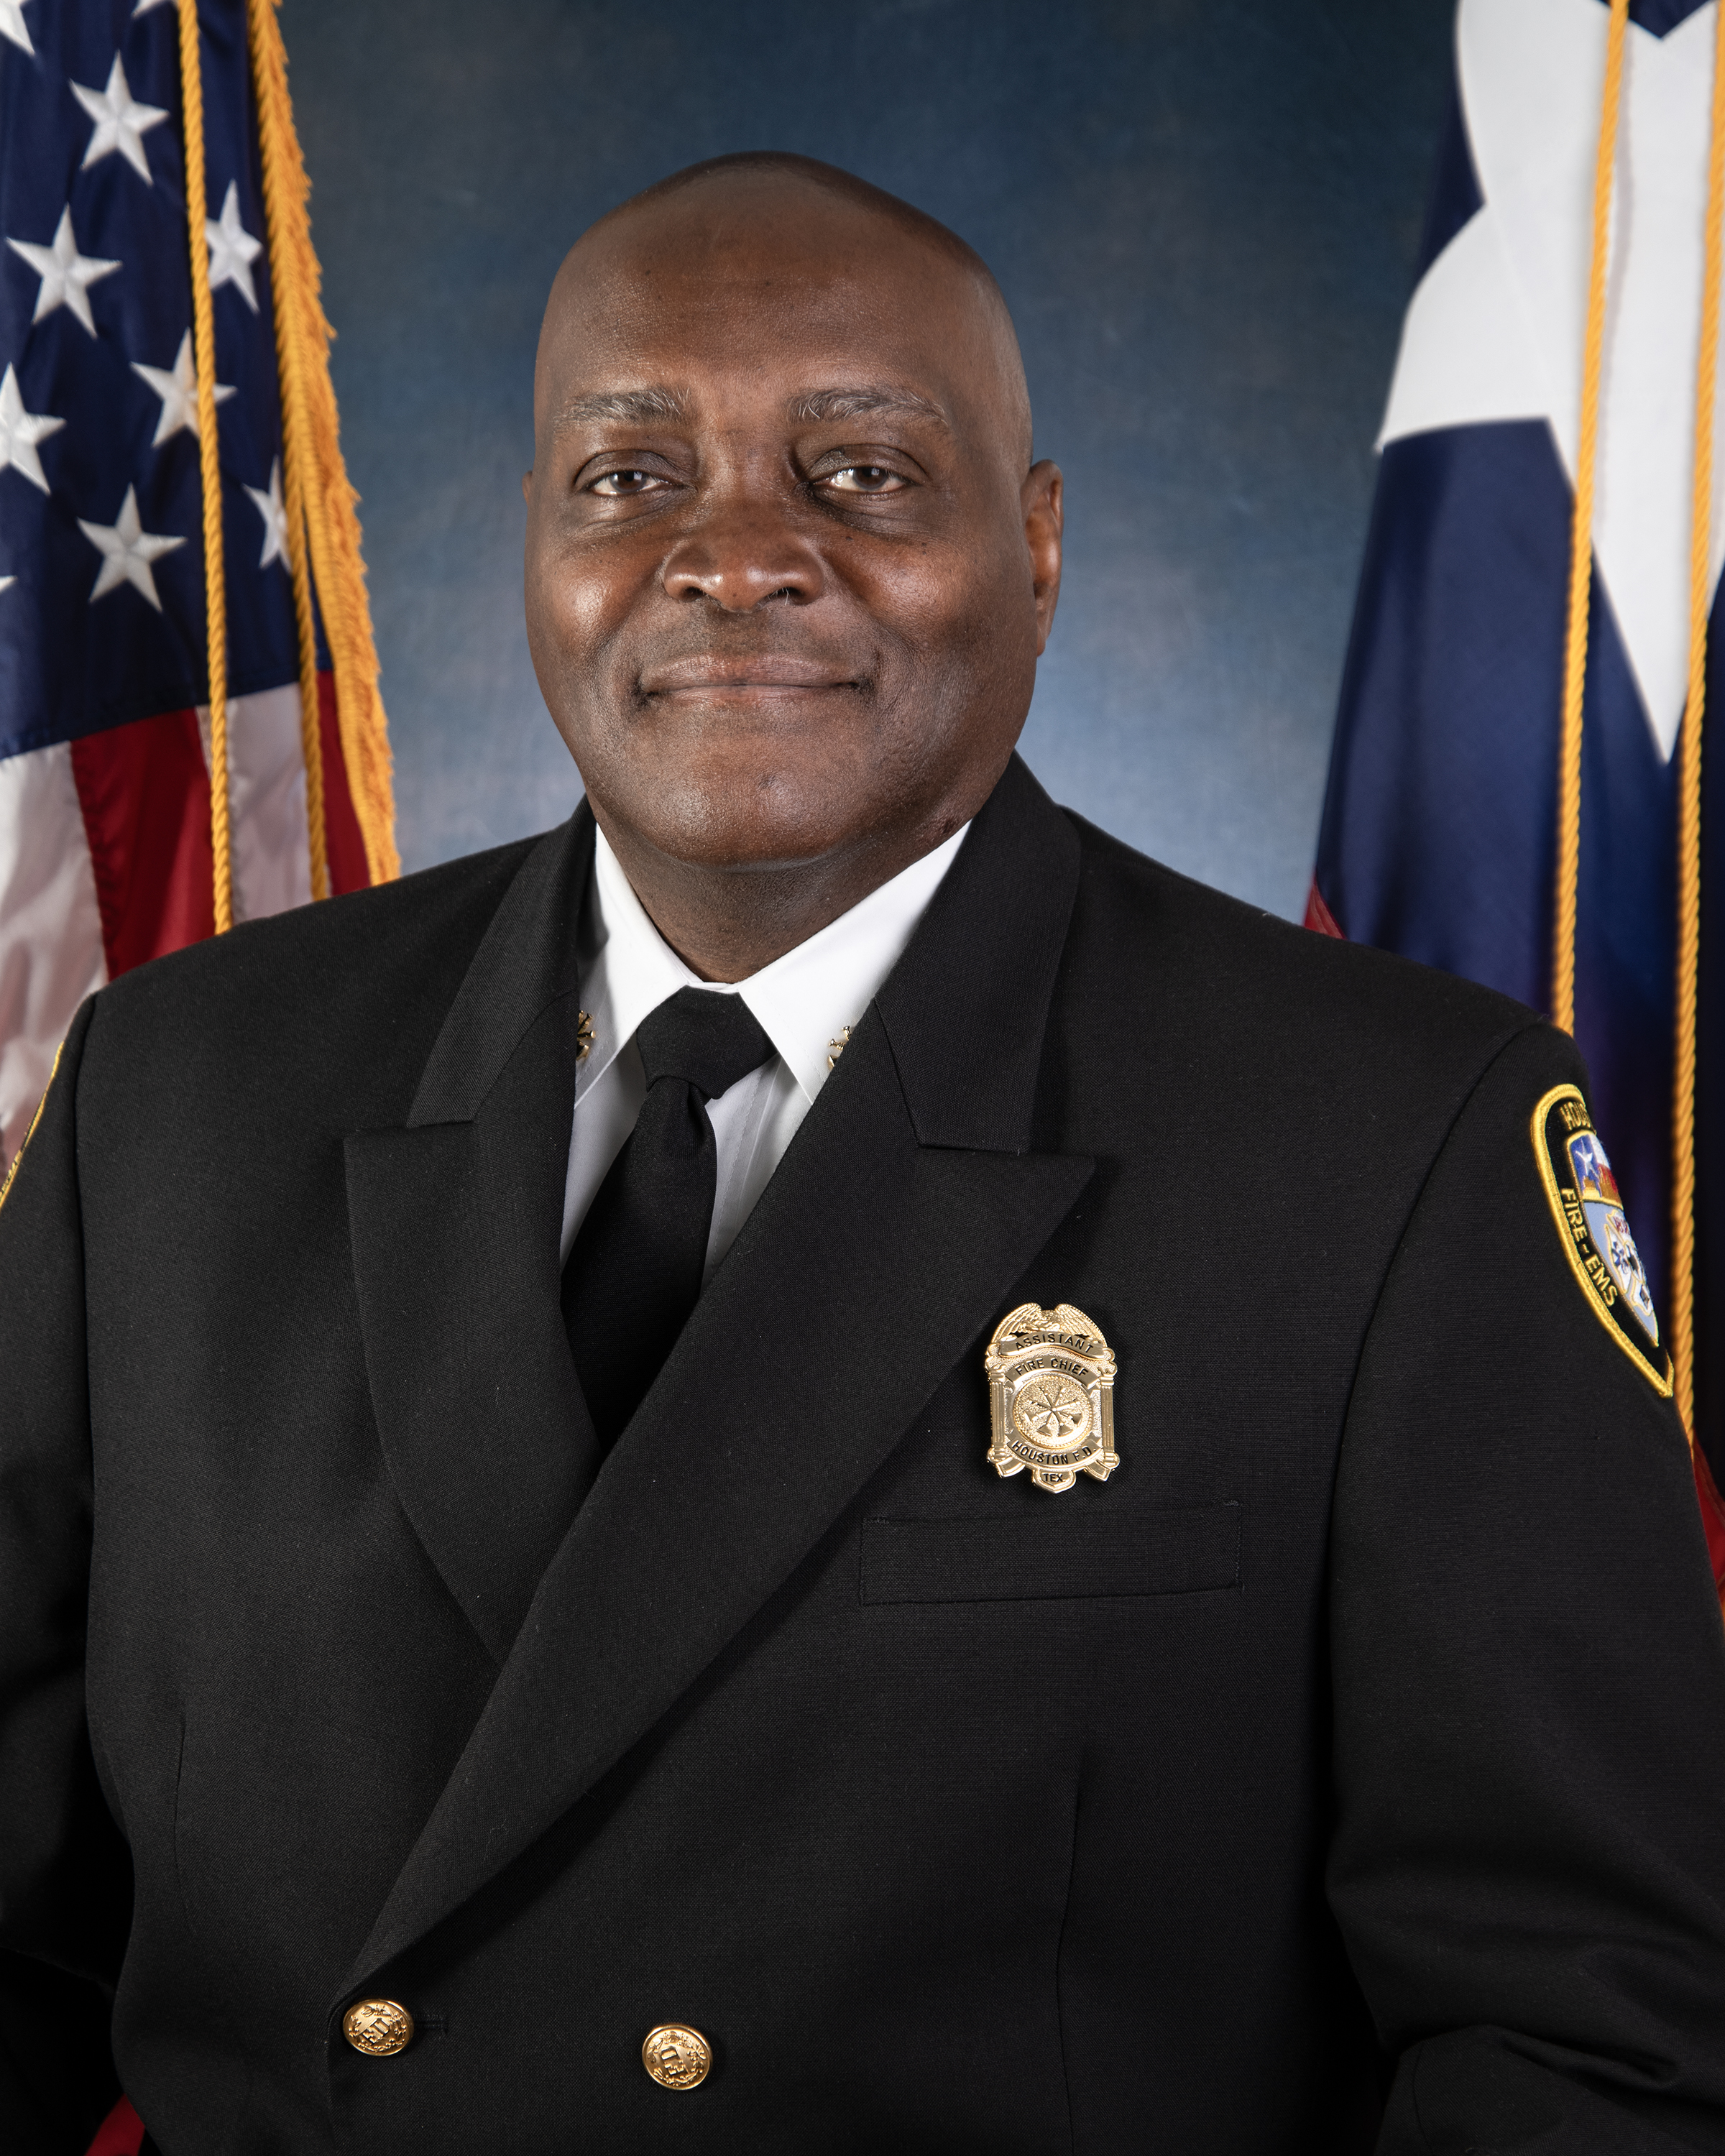 HFD Assistant Chief Shelby Walker